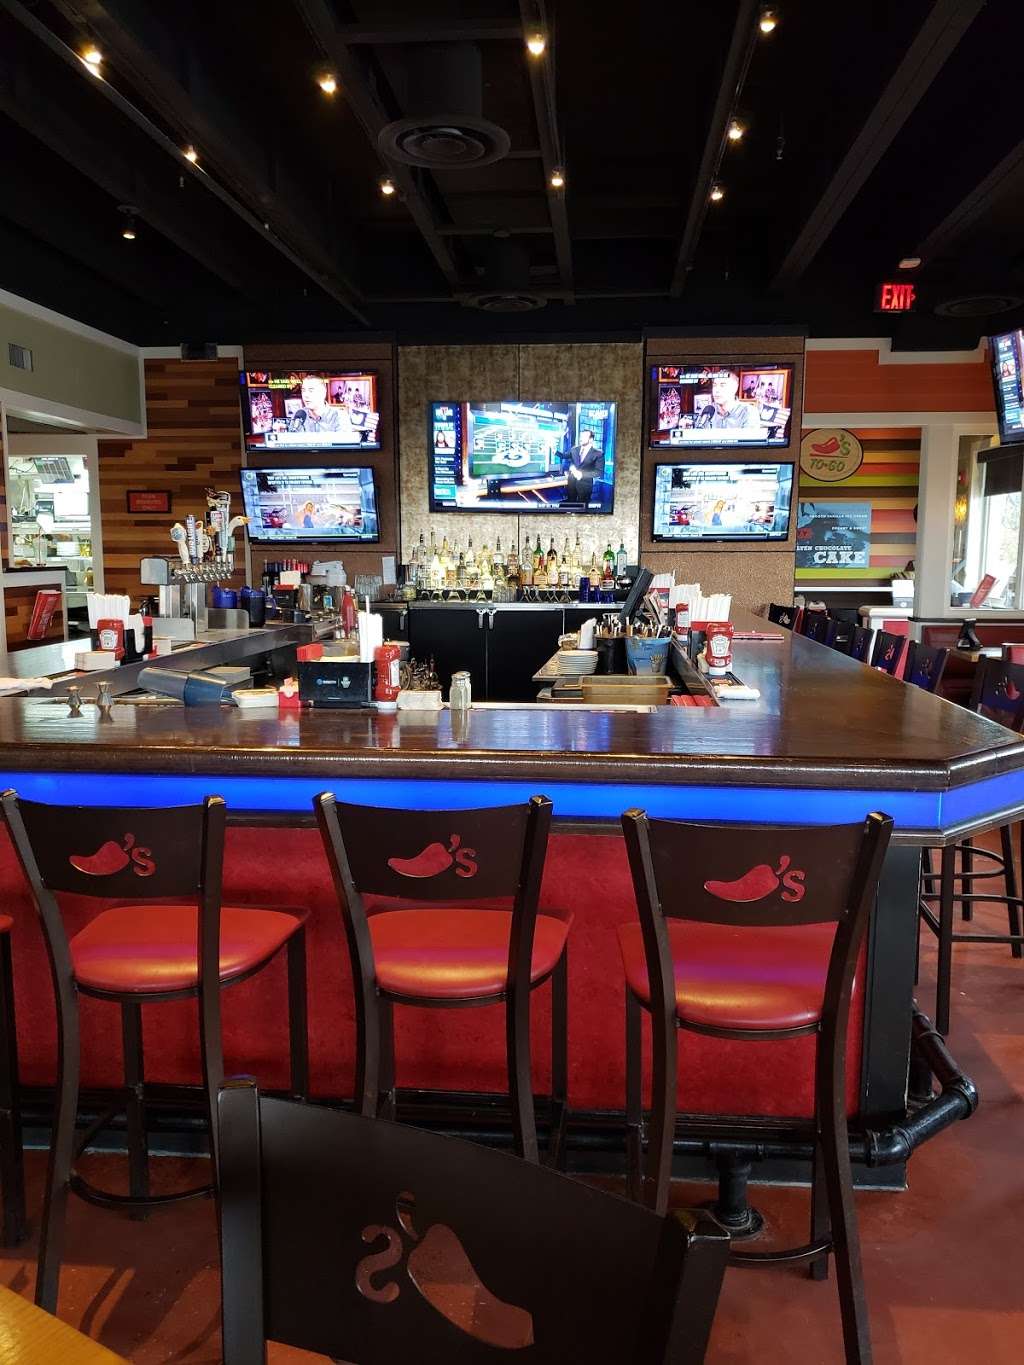 Chilis Grill & Bar | 1715 W Nursery Rd, Linthicum Heights, MD 21090 | Phone: (410) 694-8080